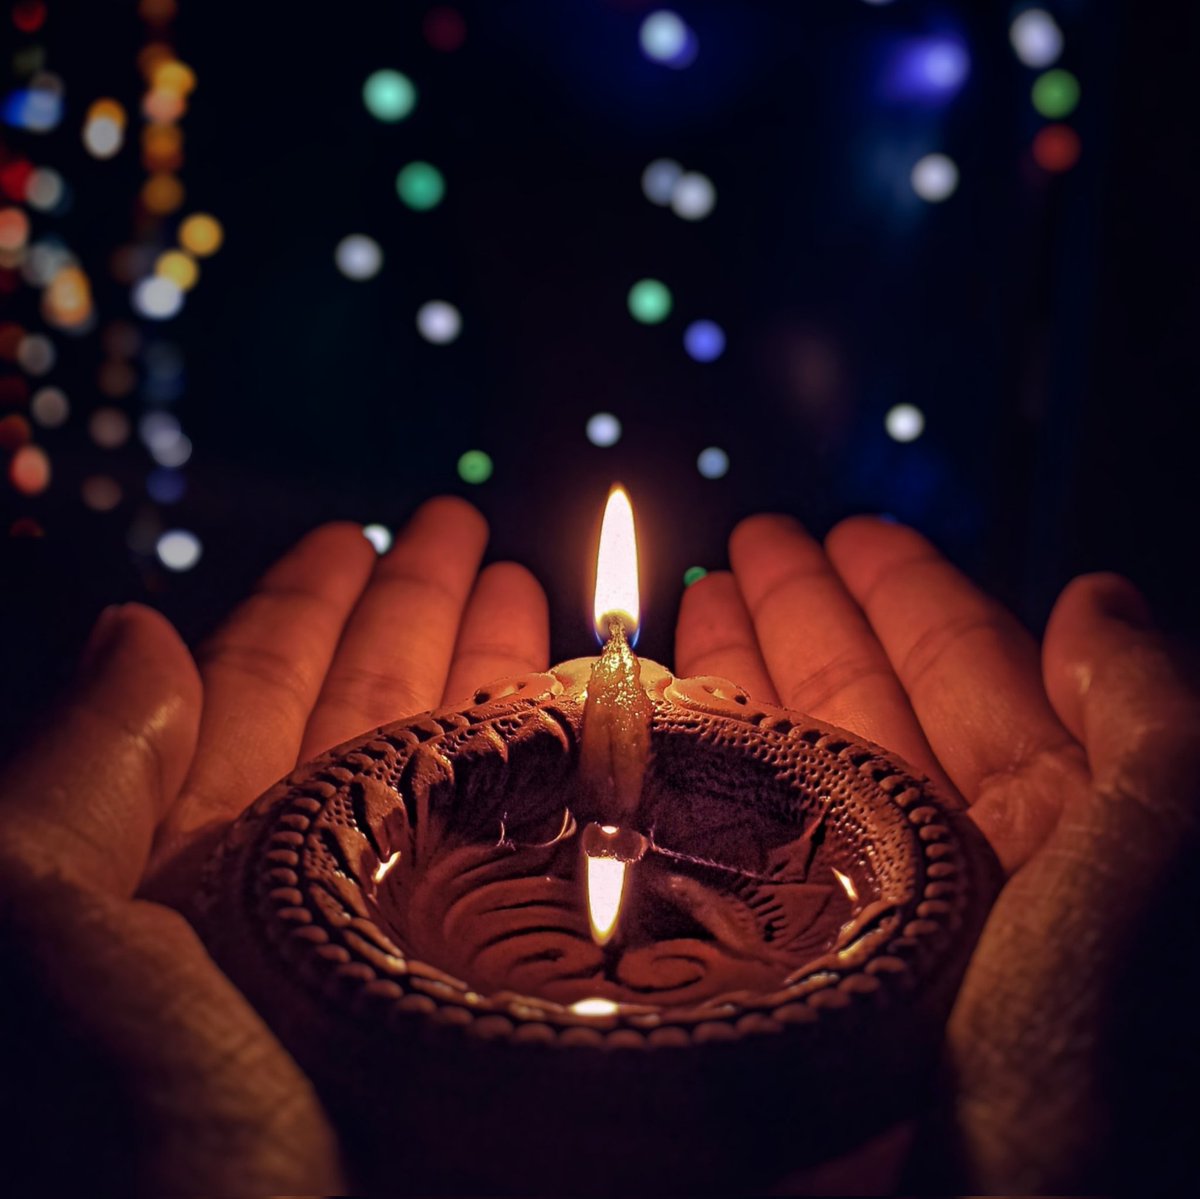 Wishing all those who celebrate it a Happy Diwali 🪔 I am reminded of beautiful celebrations I have been able to join, and to let the light within each of us shine bright for those who need it – light that brings healing and peace.